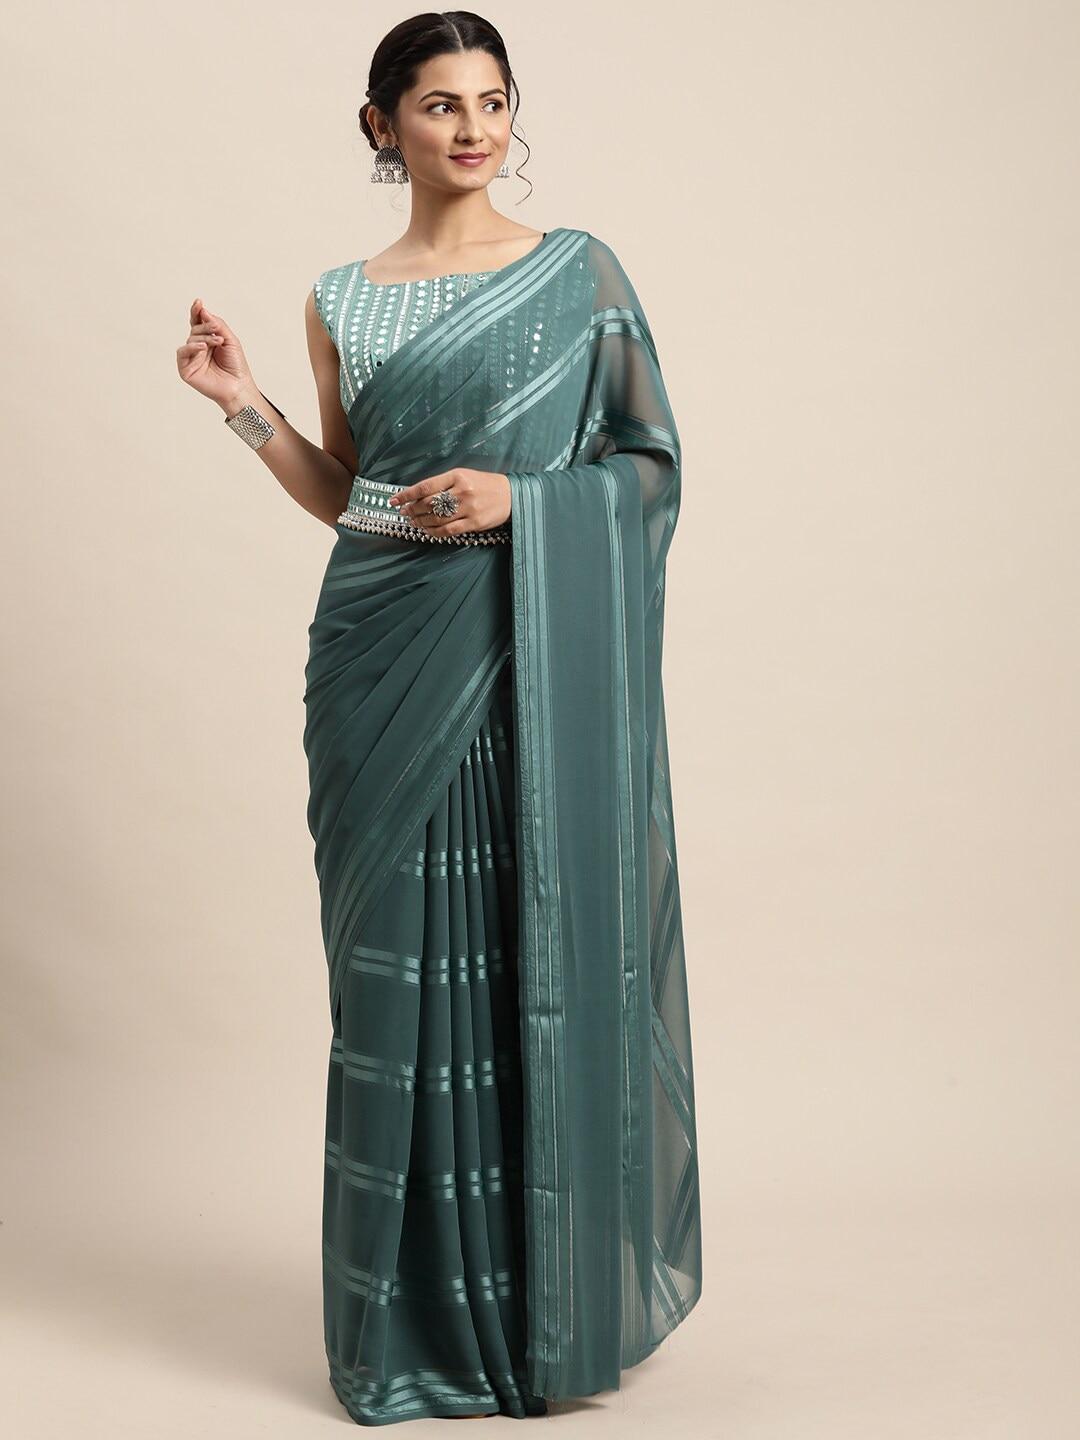 Saree mall Women Teal Poly Georgette Striped Saree Saree with Matching Blouse